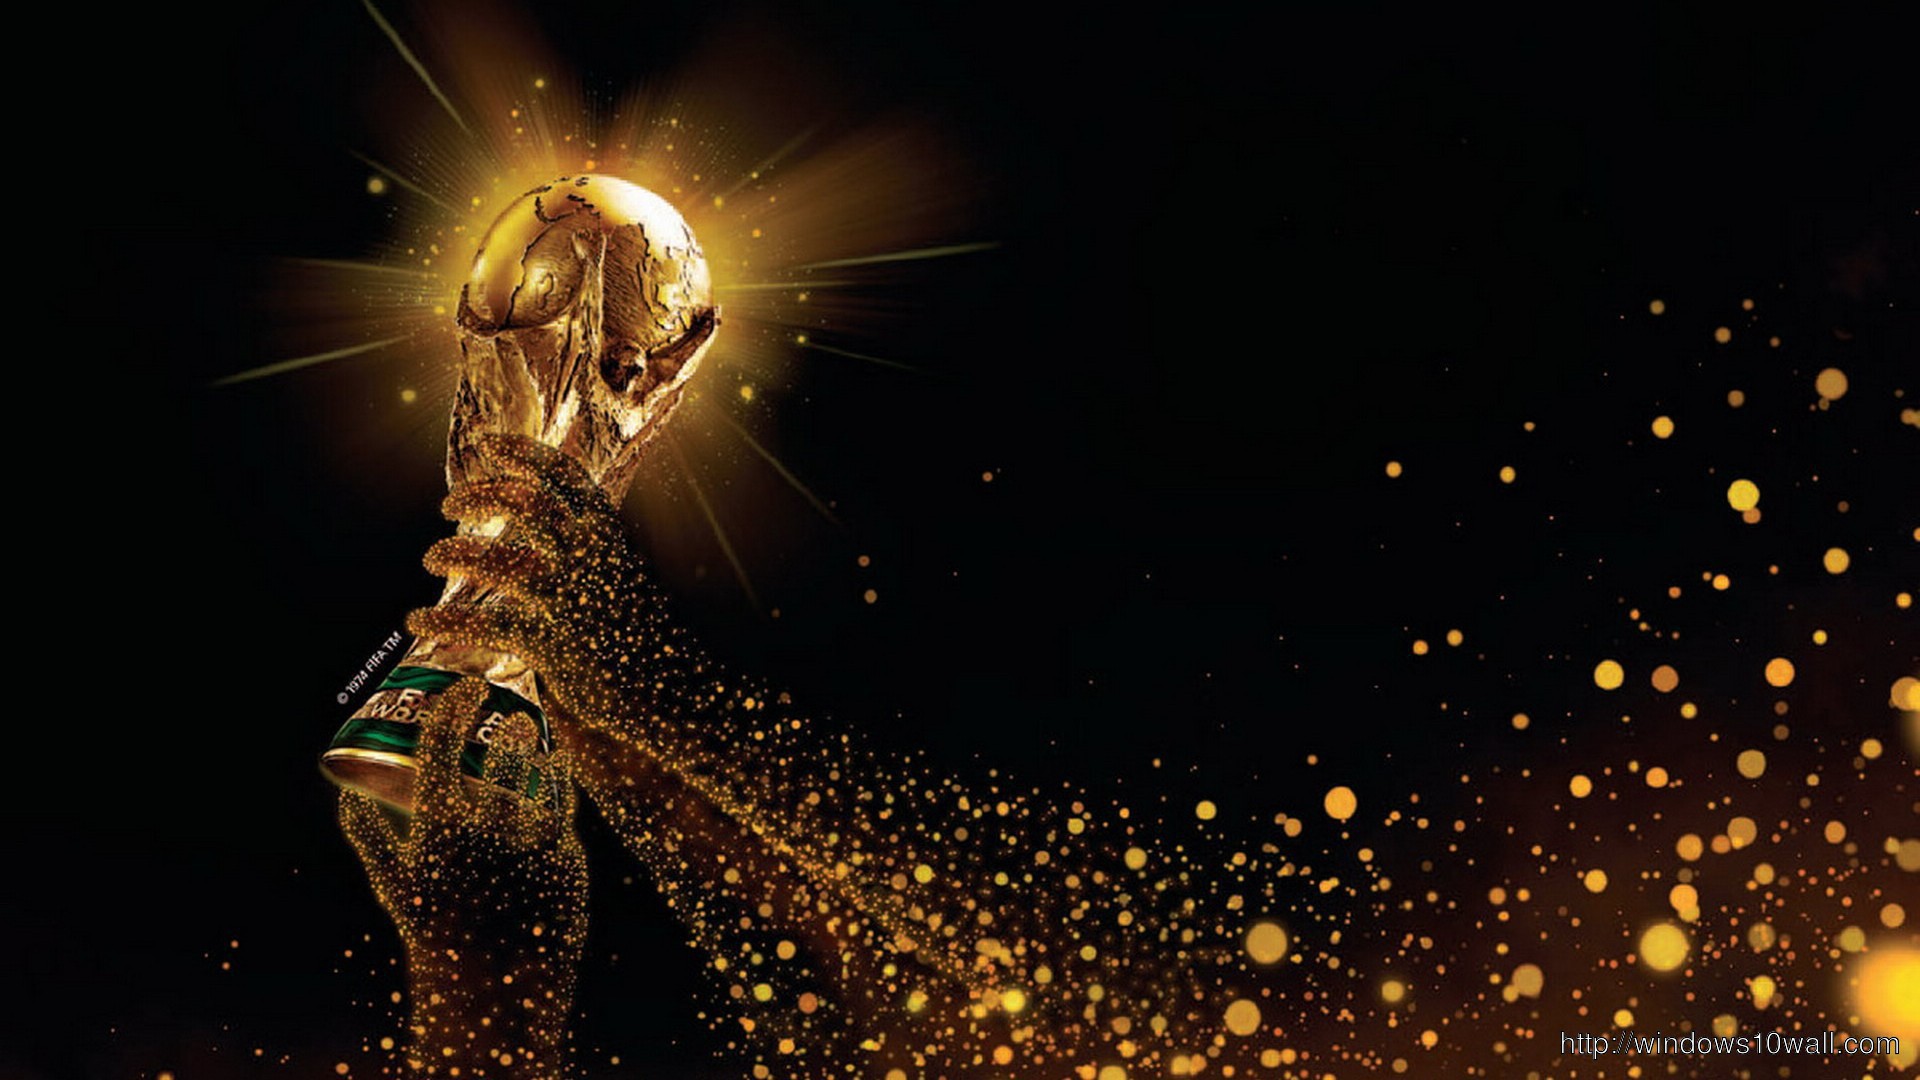 FIFA World Cup Trophy 2014 Background Wallpaper